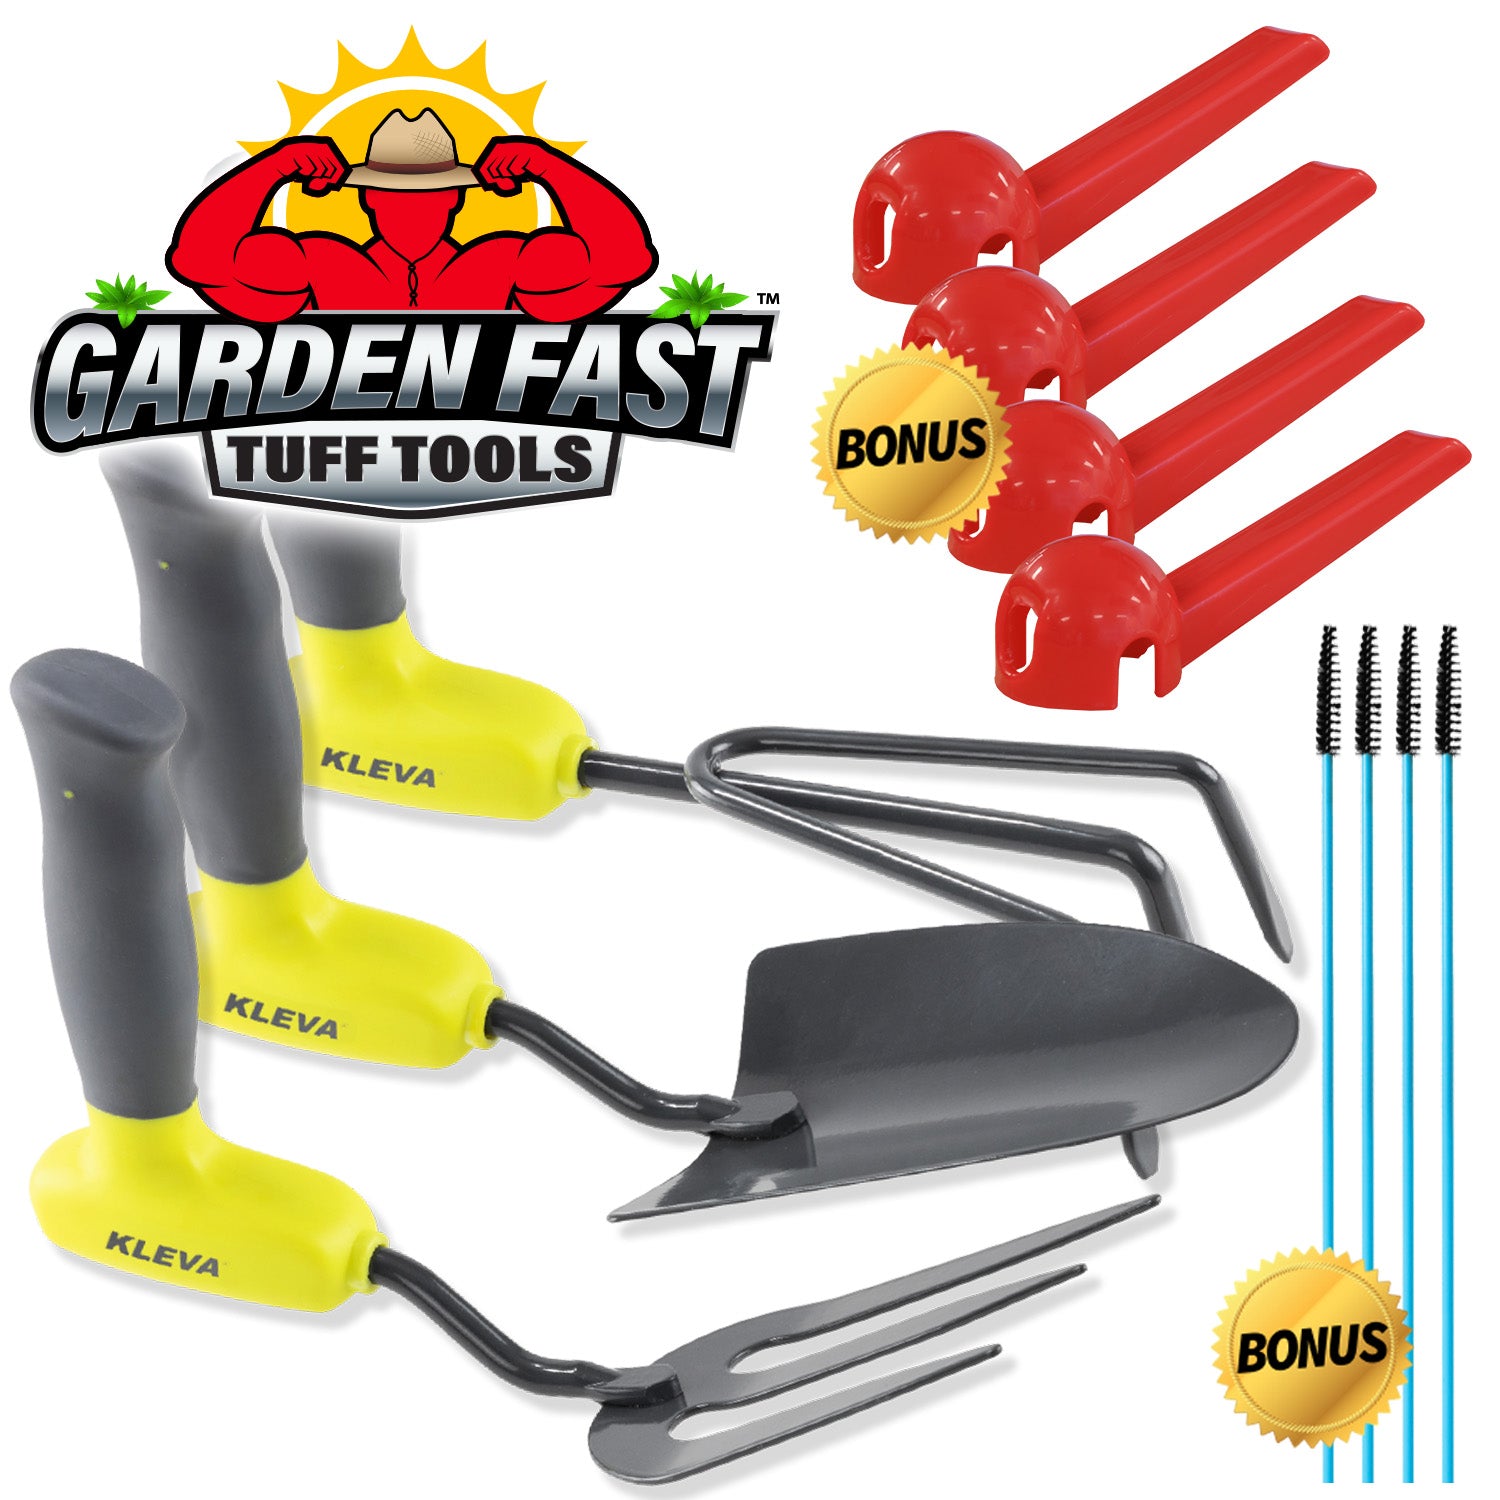 Garden Fast Tuff Tools™ Carbon Steel 3-Piece Comfort Gardening Tools - Over $50 In FREE Gifts TV Offer Kleva Range - Everyday Innovations   